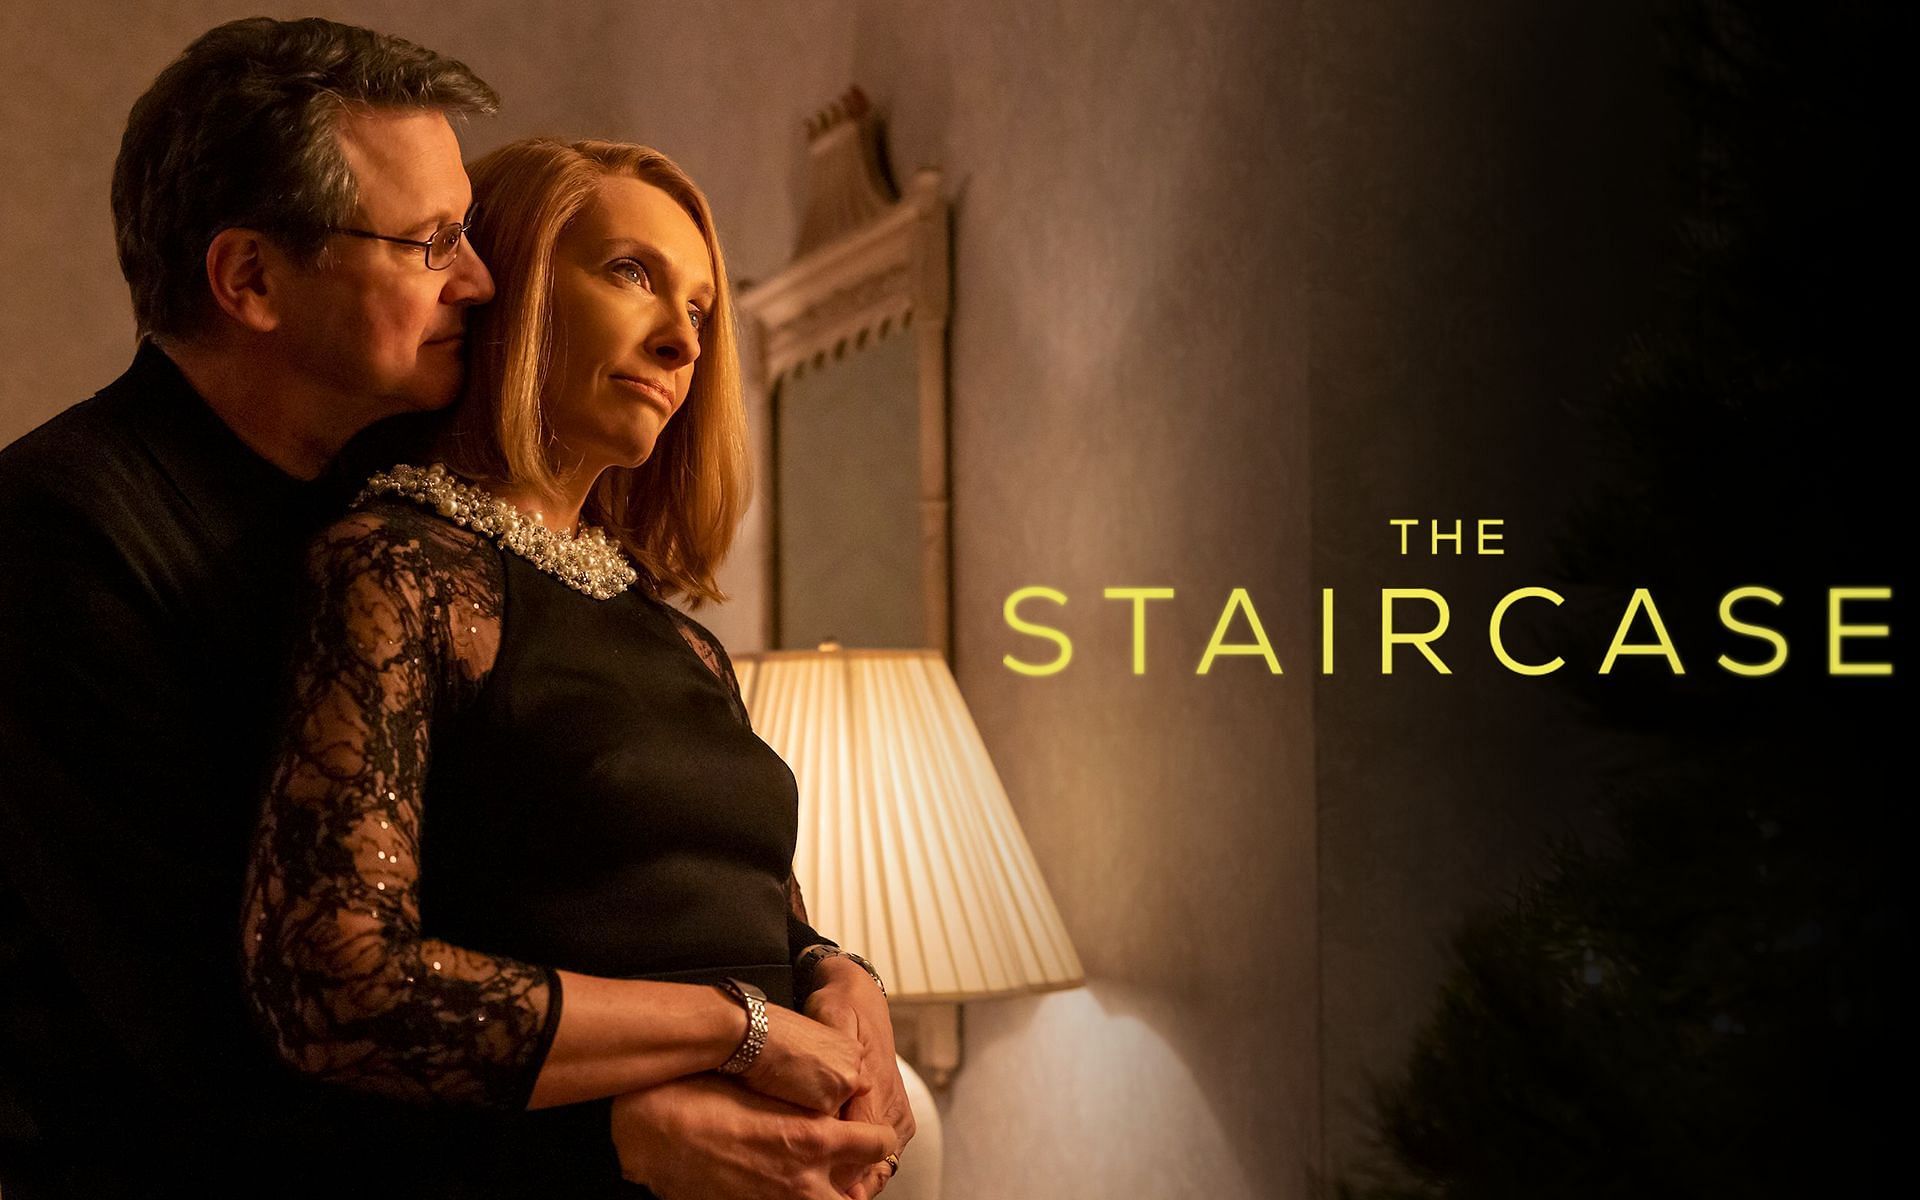 The Staircase premieres on HBO Max on Thursday, May 5, 2022, at 3 a.m. ET. (Image via HBO Max)